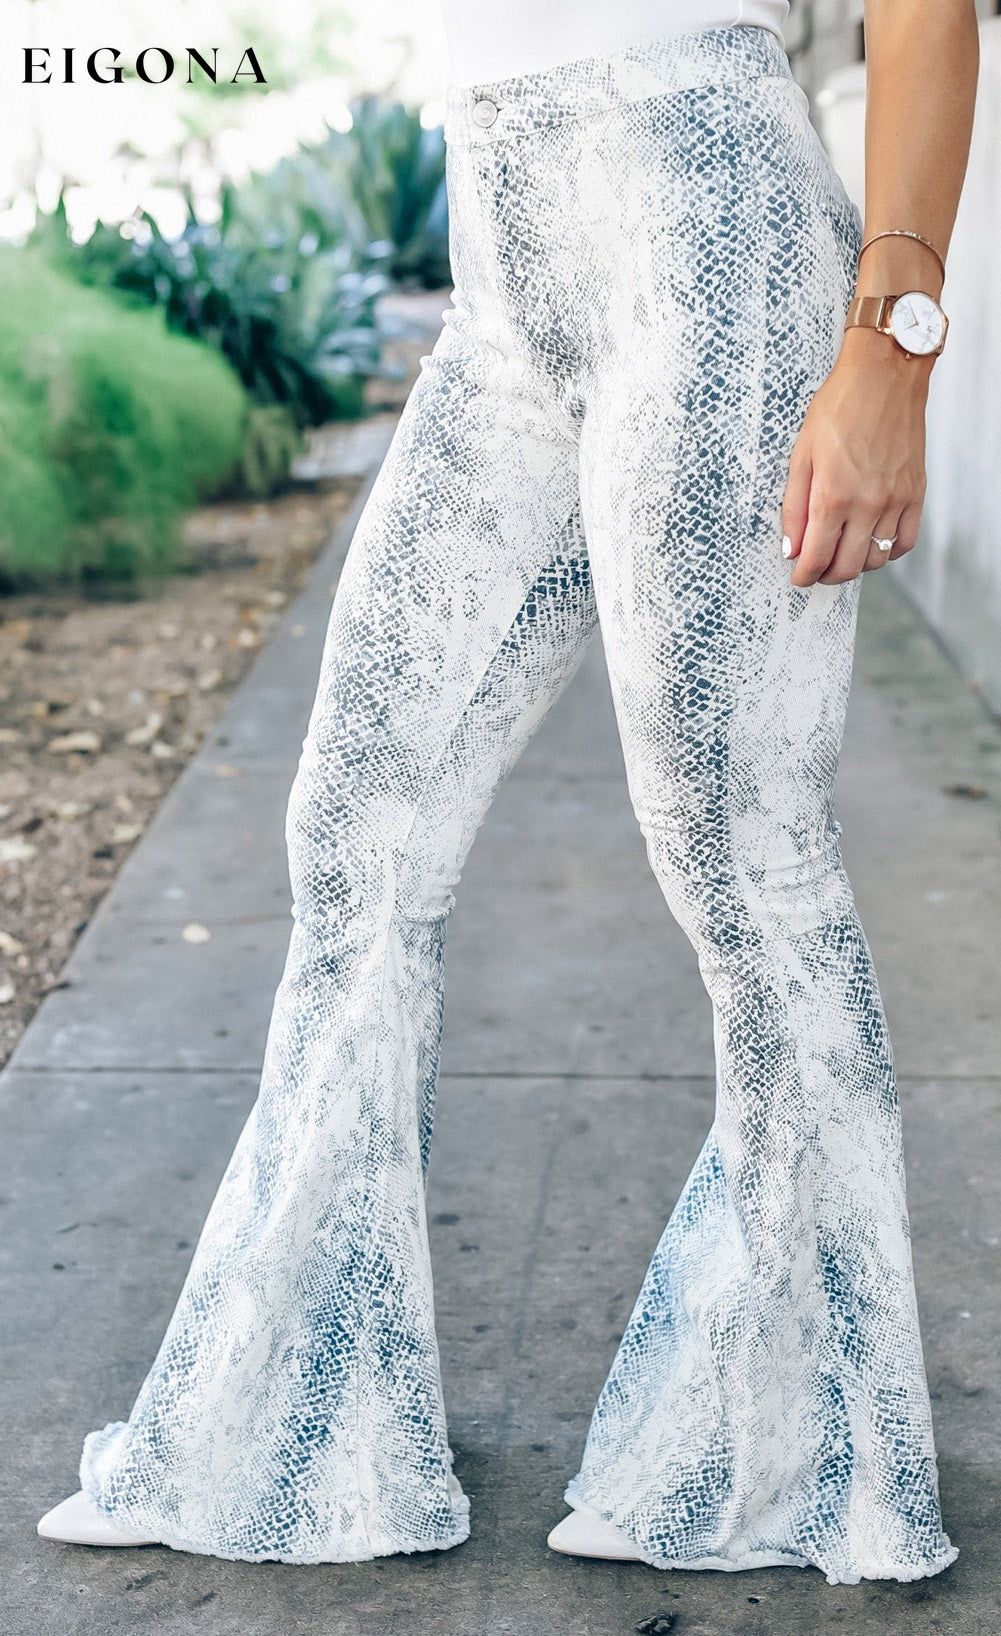 White Western Fashion High Waist Snakeskin Print Flare Pants All In Stock bottoms clothes Flare Jeans Jeans Occasion Daily pants Season Fall & Autumn Silhouette Flare Style Western wide leg pants